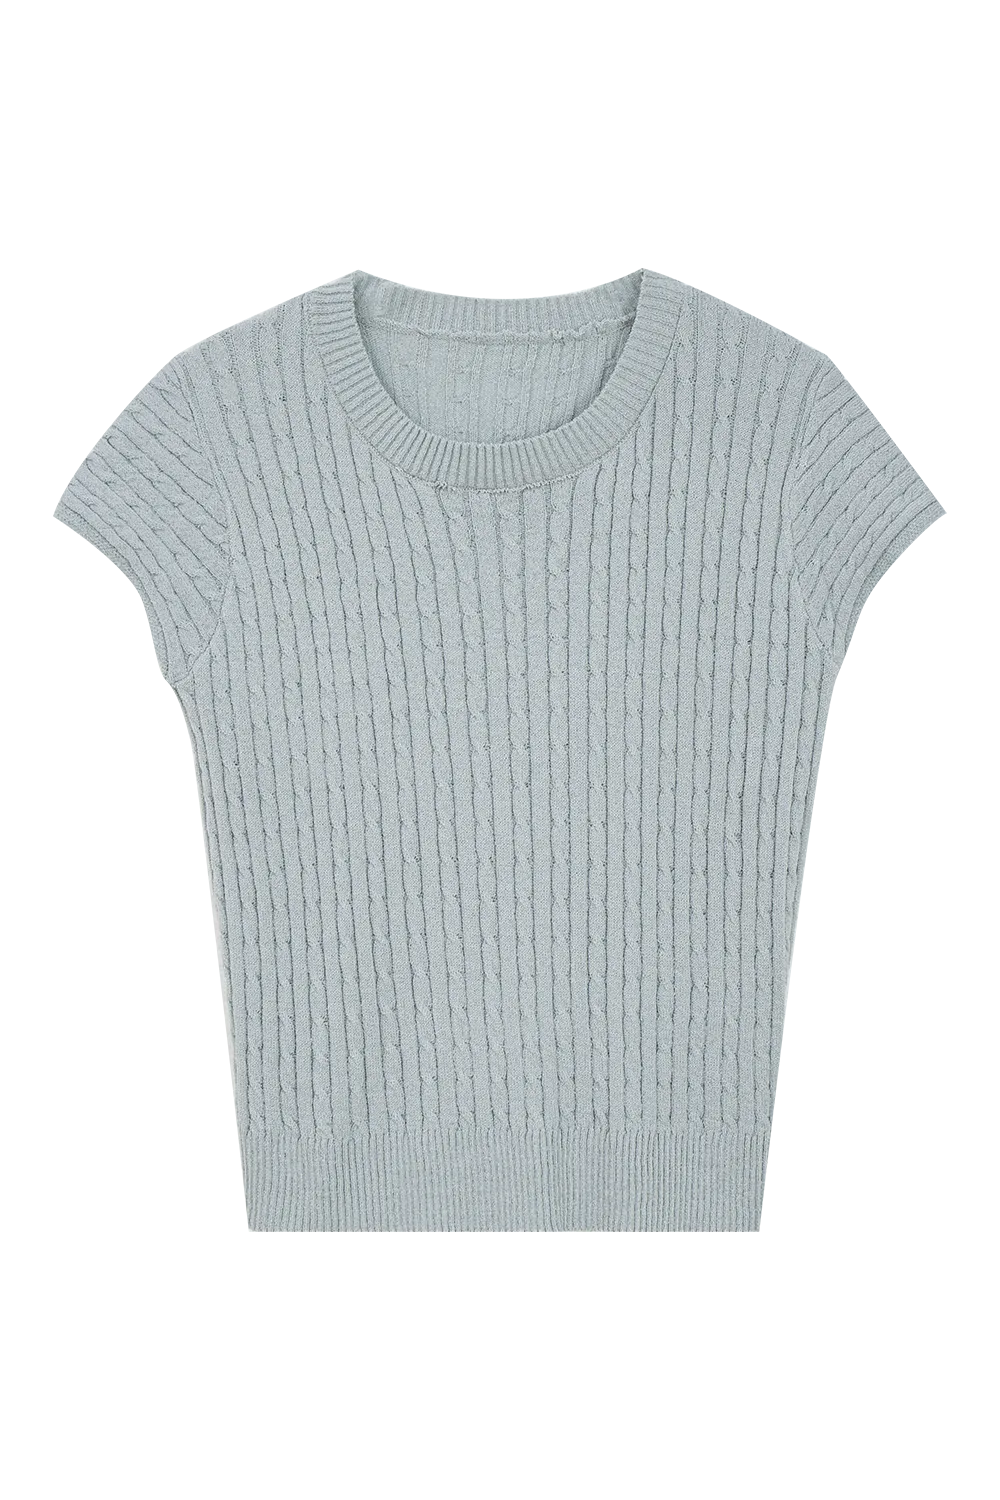 Ribbed Knit Short-Sleeve Sweater - Classic Comfort